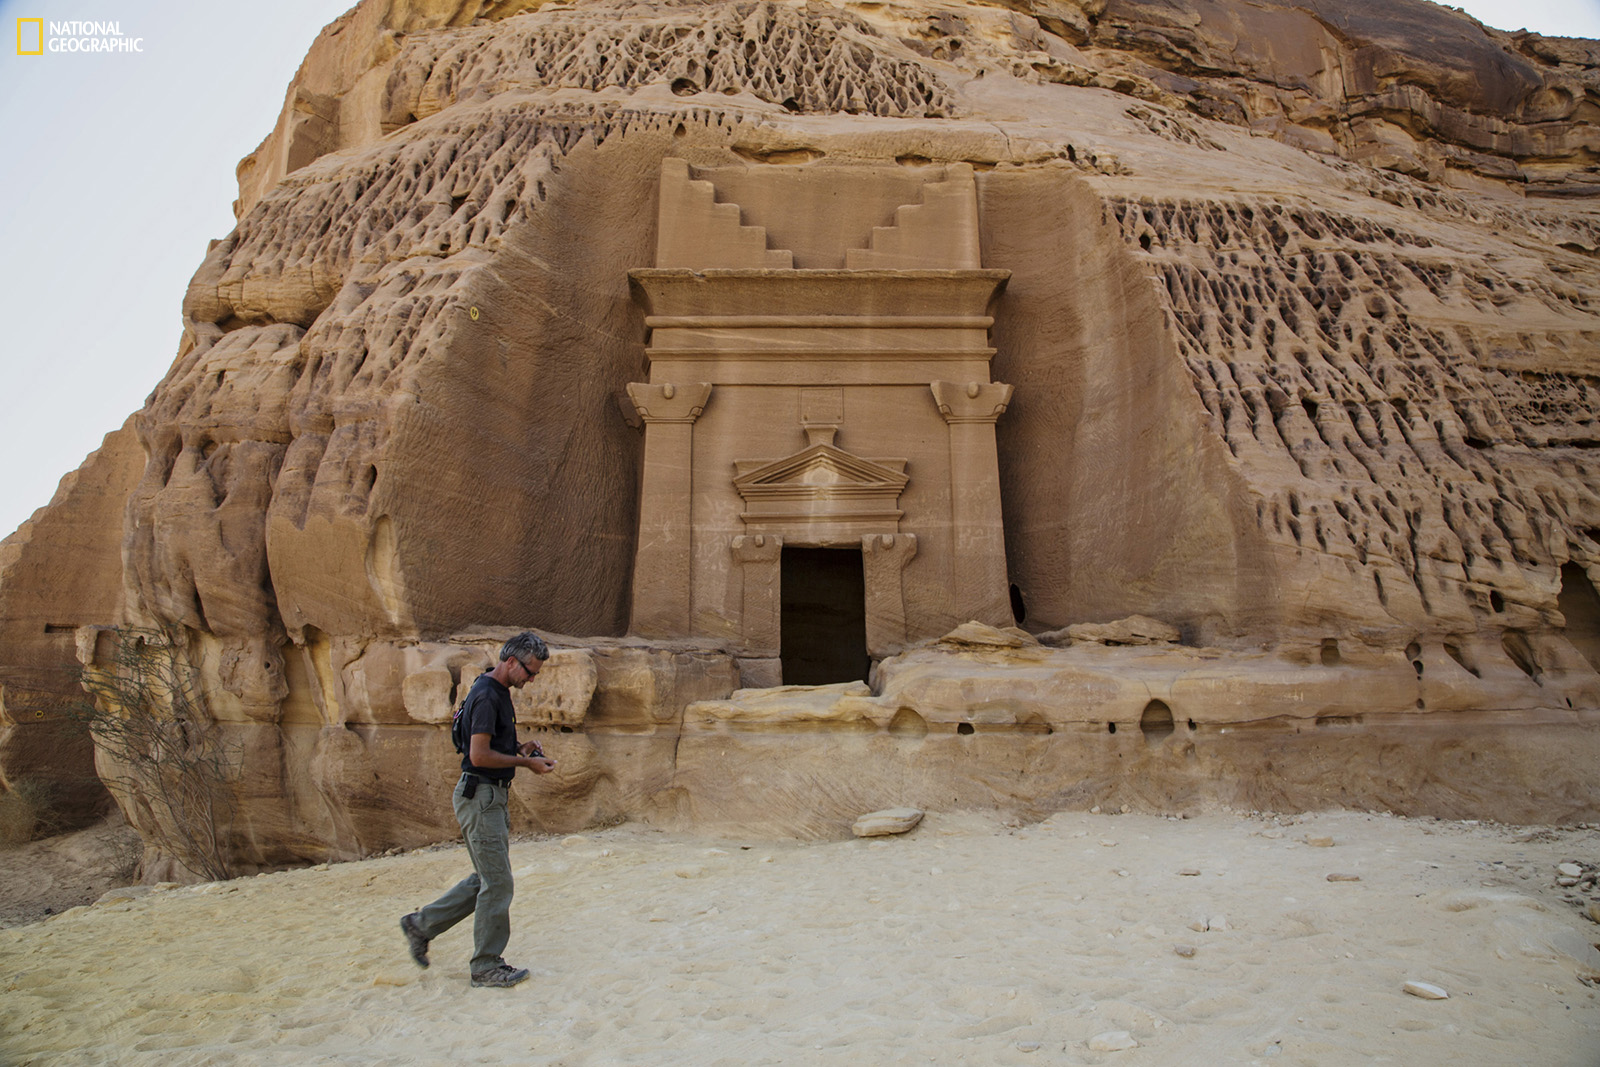 Paul Salopek wanders through the ancient Nabataean ruins of Madain Salih, carved into sandstone outcrops some 2,000 years ago. These structures were used as tombs for the wealthy during the Nabataean era. The kingdom stretched from its capital Petra in Jordan south to Madain Salih in the Hejaz region of present-day Saudi Arabia. Photo shows a tomb façade in the Al Khuraymat area of Madain Salih. Join the journey at outofedenwalk.org.Photograph by John Stanmeyer / National Geographic